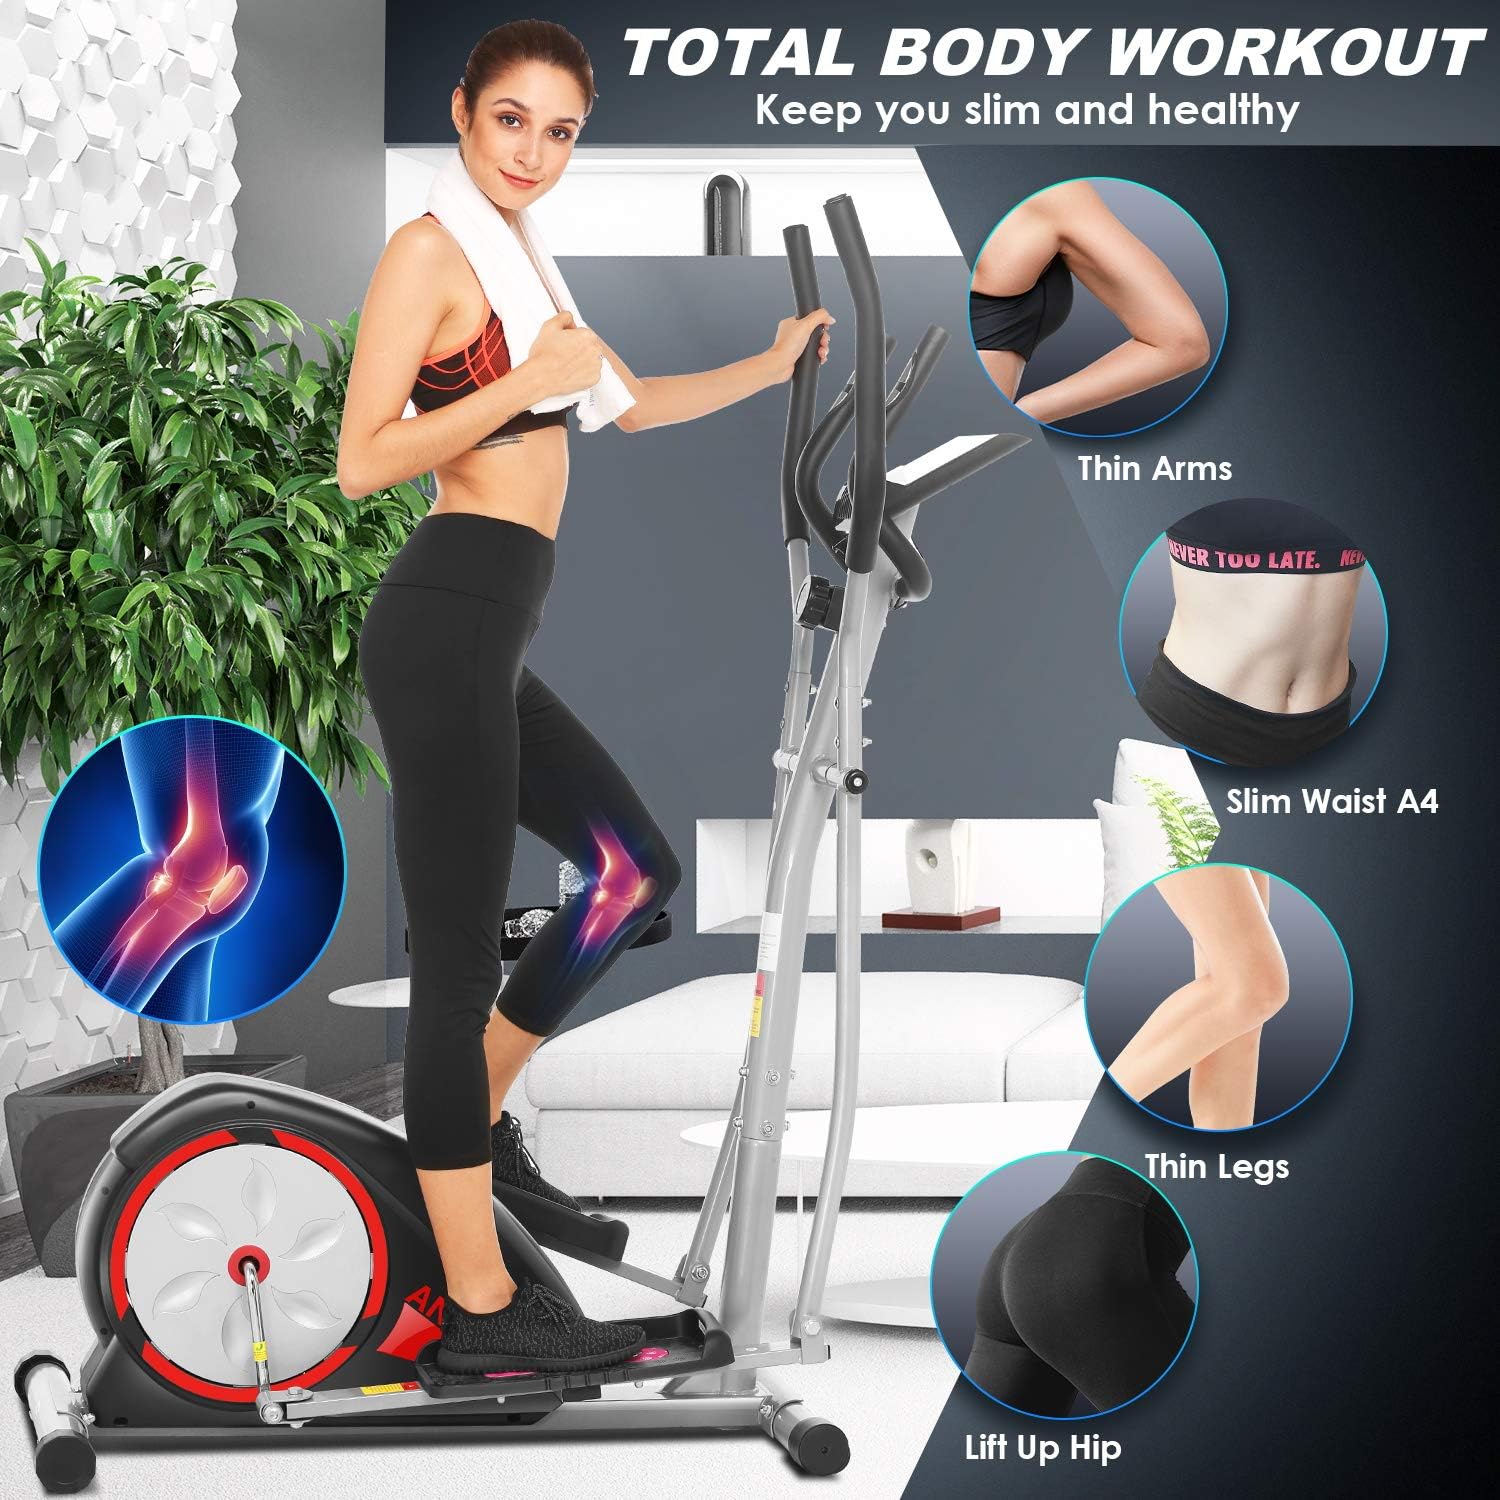 funmily 8 Levels Magnetic Resistance Elliptical,350lbs Max Load Training Machines,Smooth Quiet Driven Elliptical For Home Gym Office